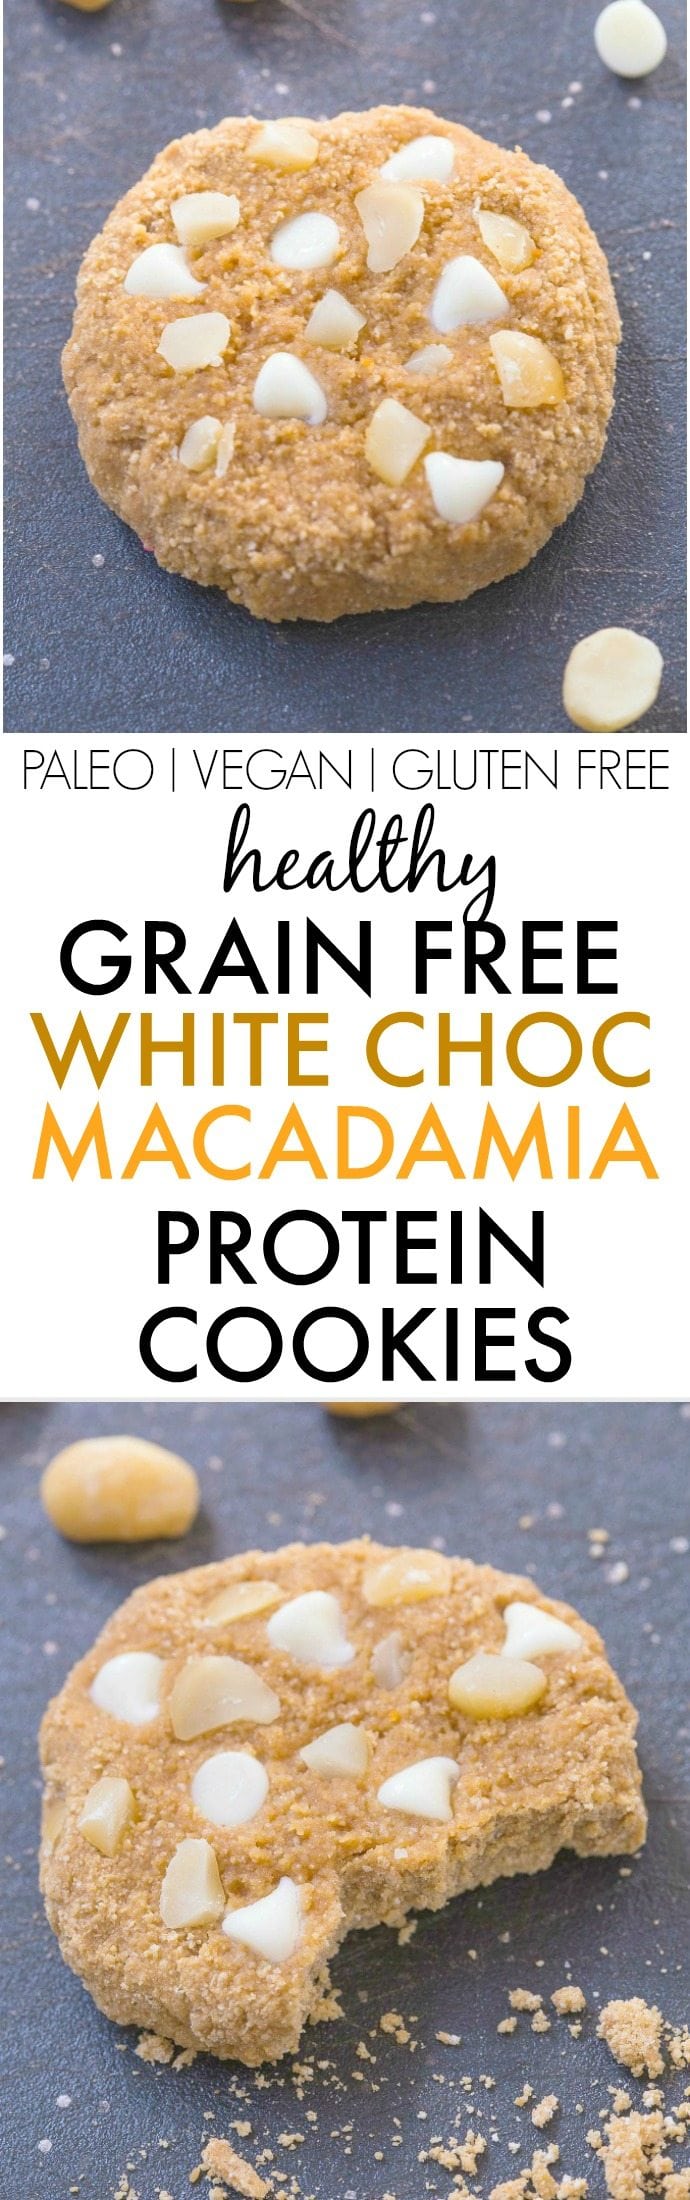 White Chocolate and Macadamia Nut Protein Cookies